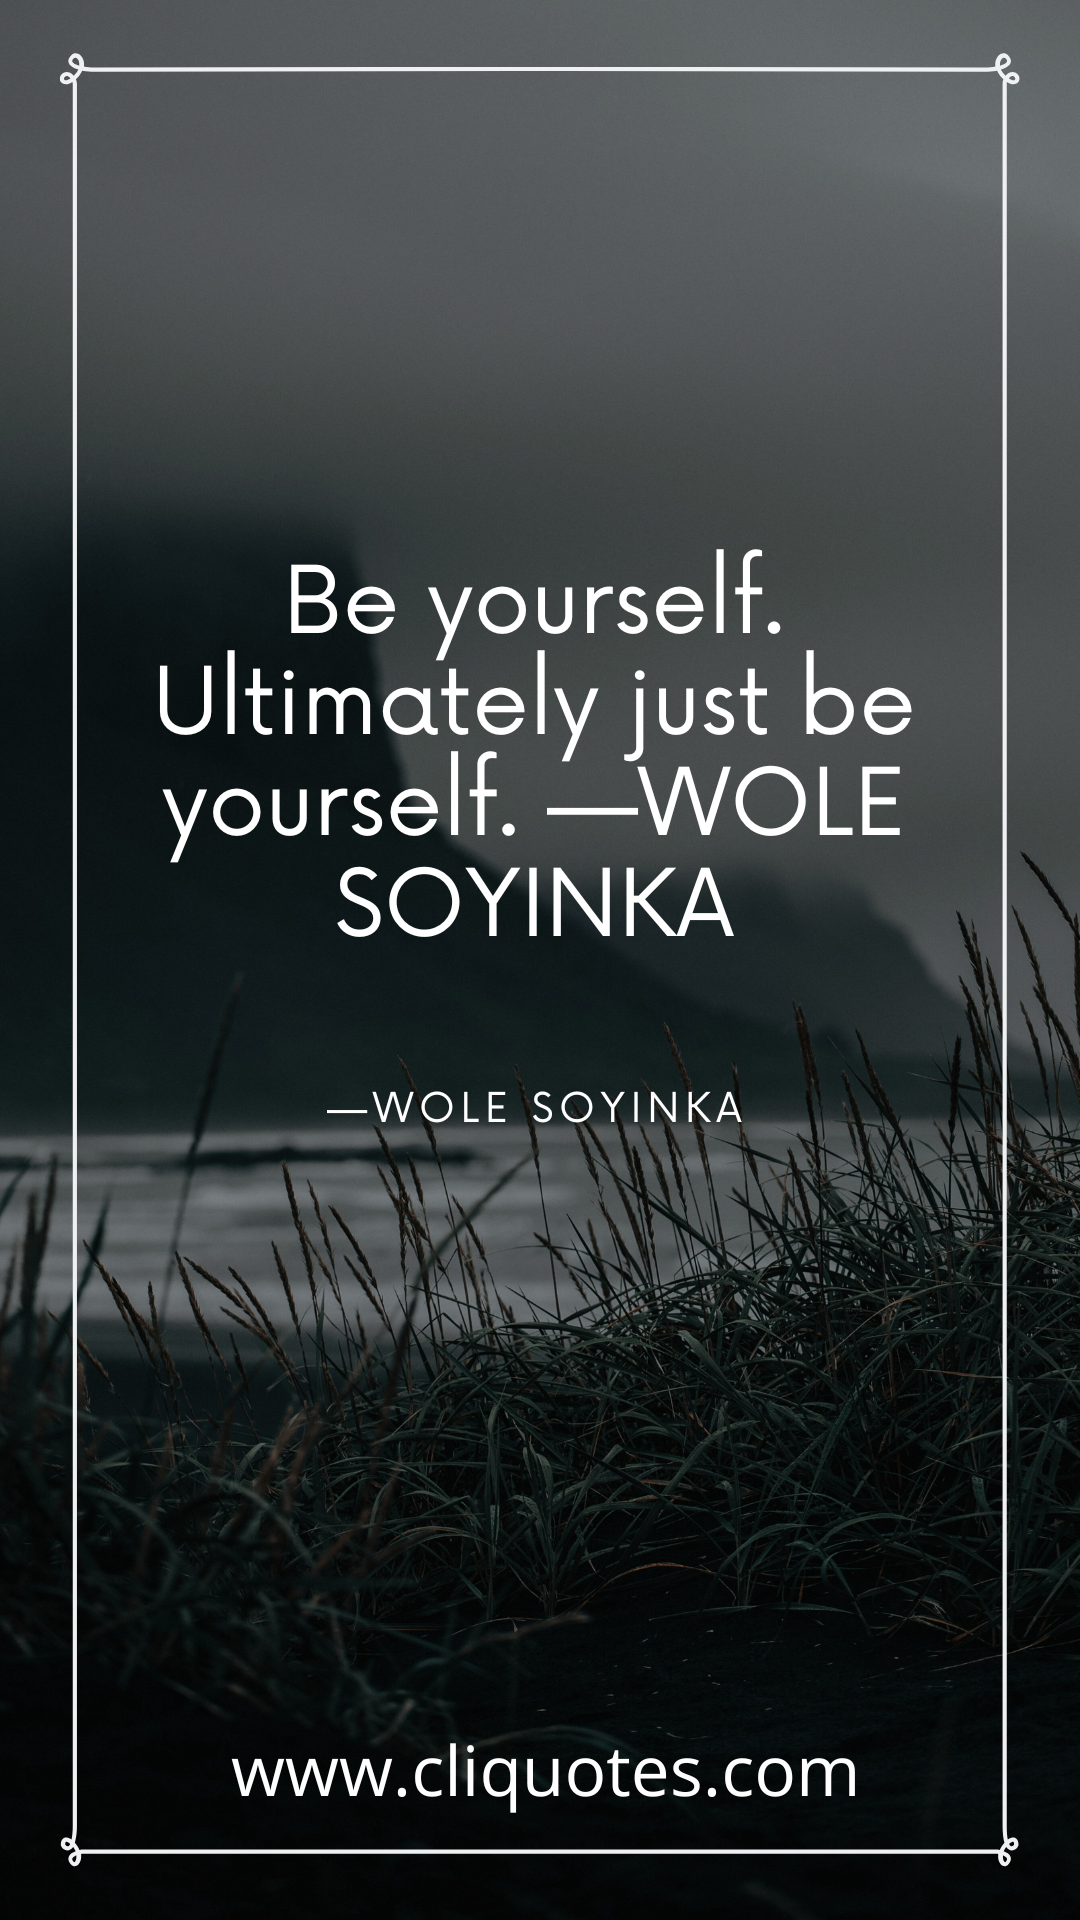 Be yourself. Ultimately just be yourself. —WOLE SOYINKA